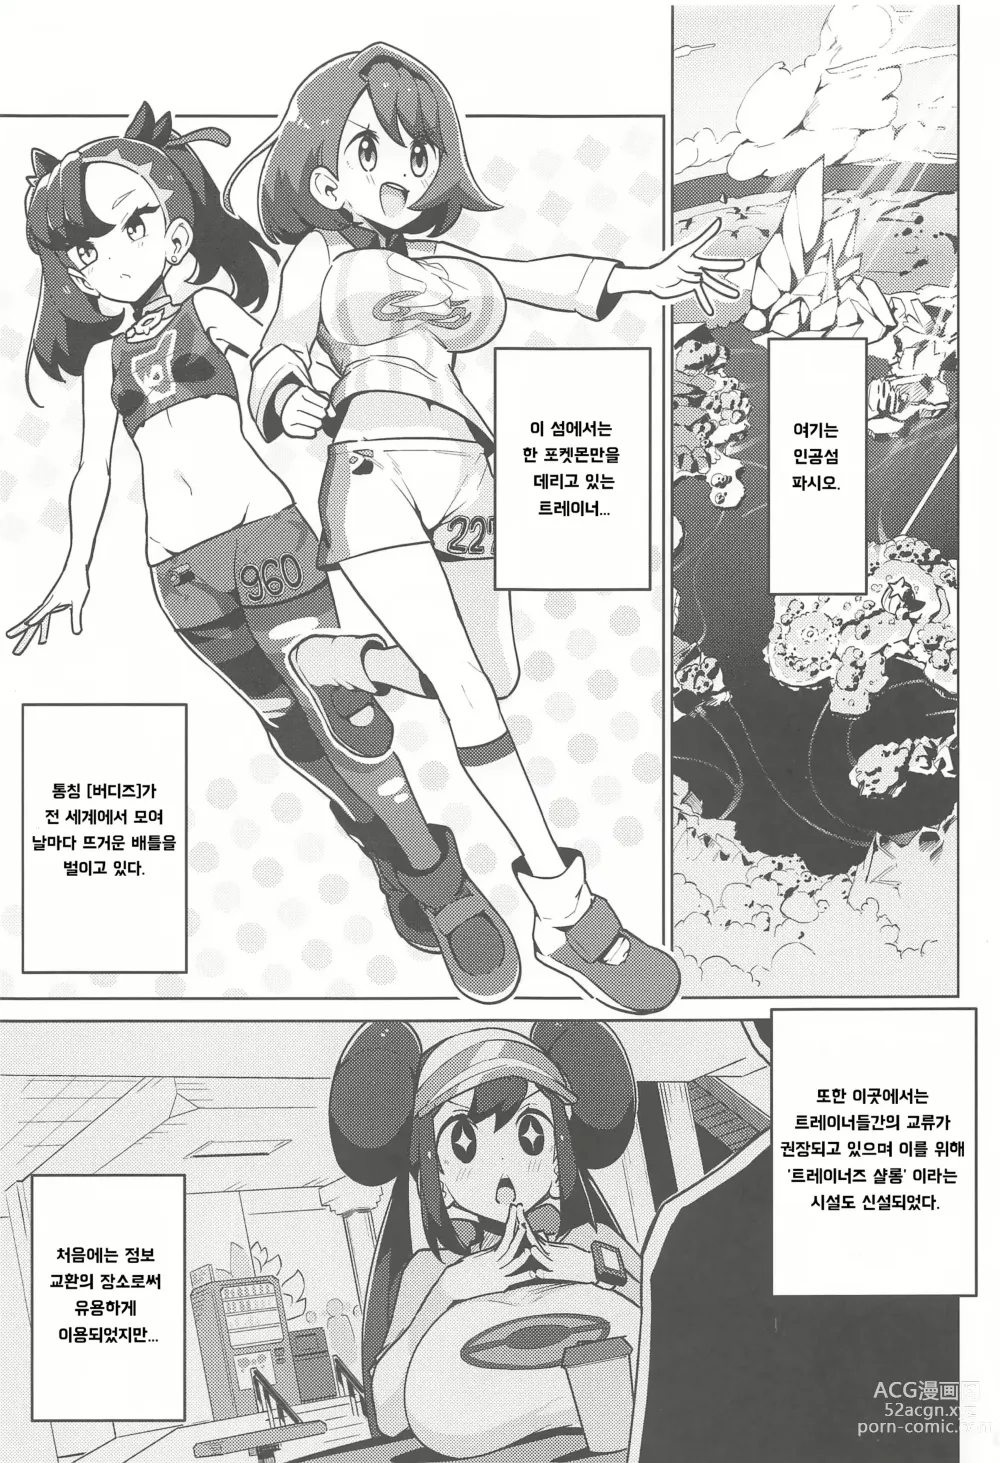 Page 2 of doujinshi 포켓 빗치 2